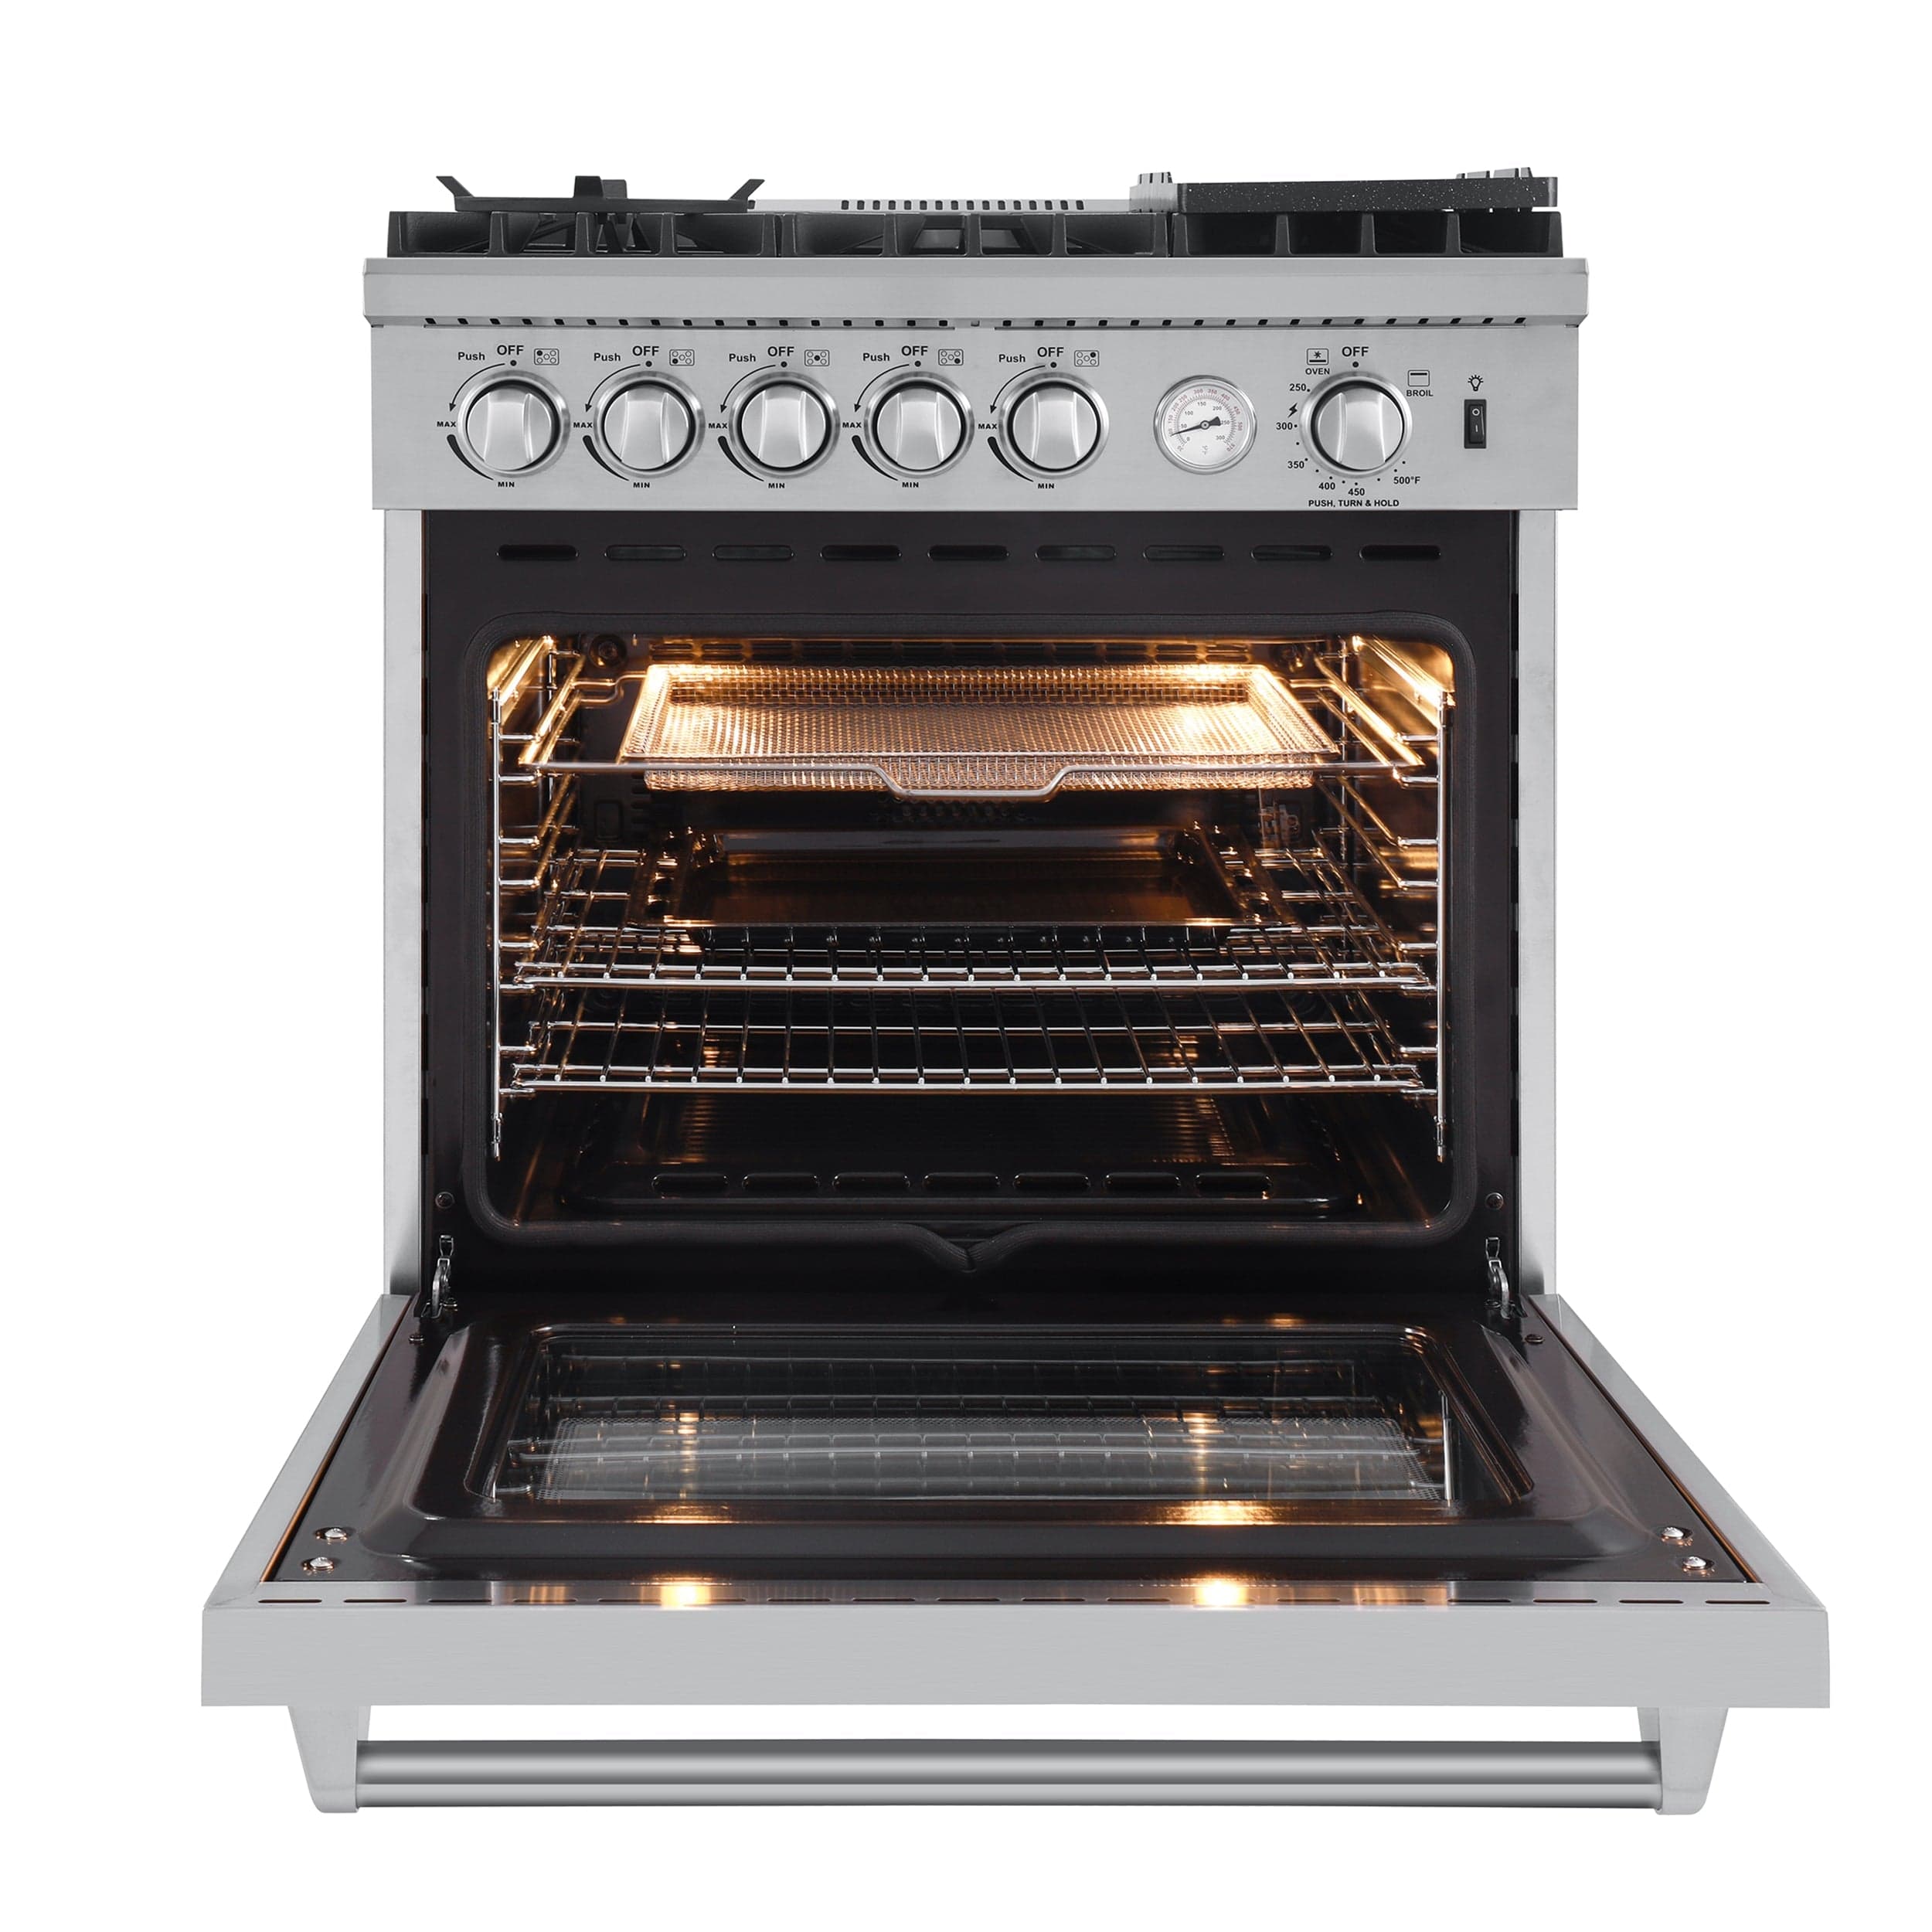 Forno Lazio 30" Gas Range with 5 Sealed Burners, Air Fryer and Griddle, FFSGS6276-30 Ranges FFSGS6276-30 Luxury Appliances Direct